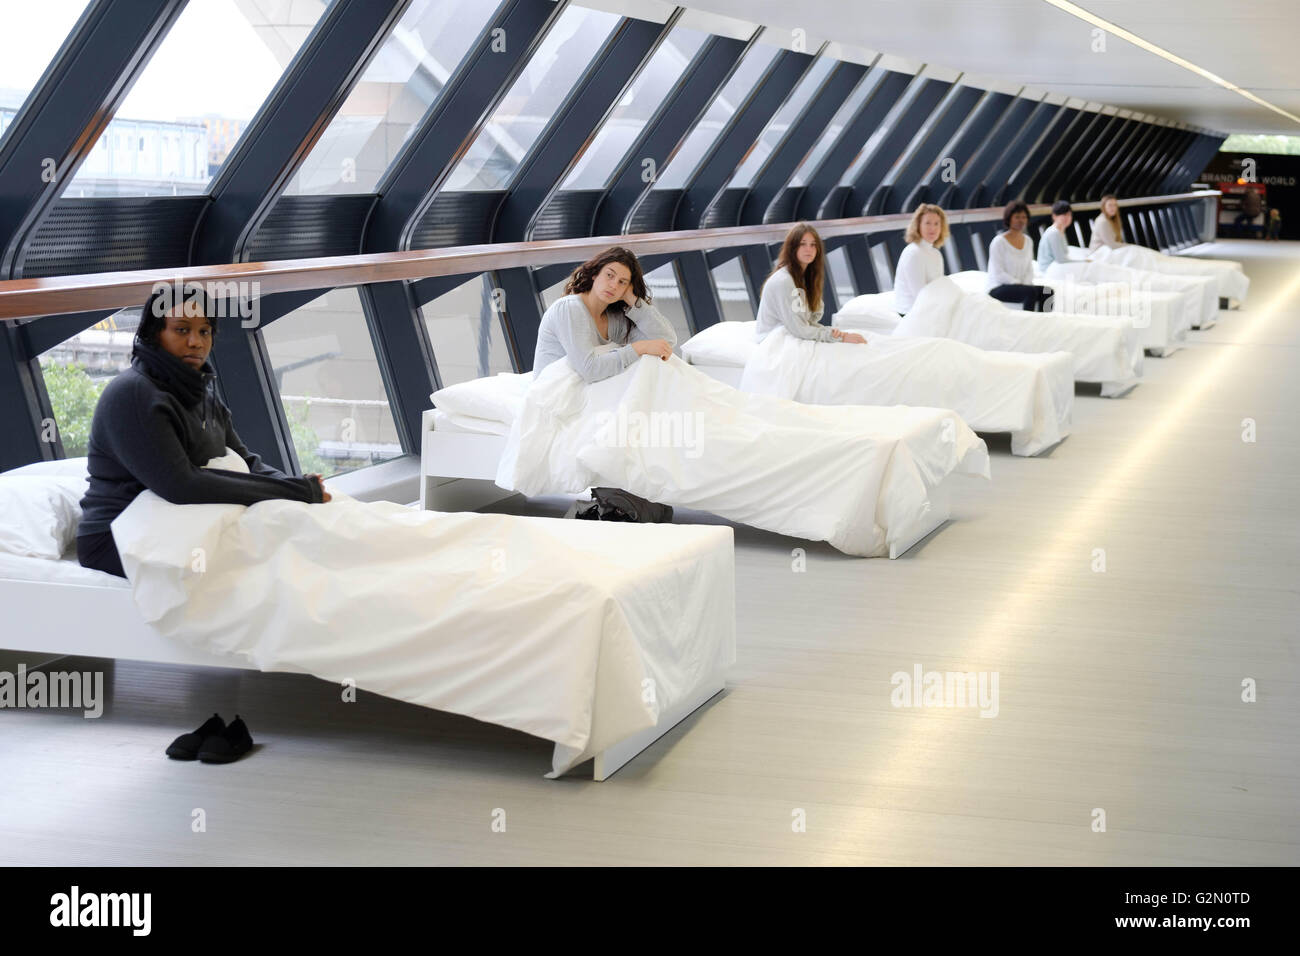 Everything by my side, a theatrical performance that sees actors in white beds whisper to individual audience members, created by Argentinian artist Fernando Rubio, is unveiled as it makes its UK debut at Canary Wharf in London. Stock Photo